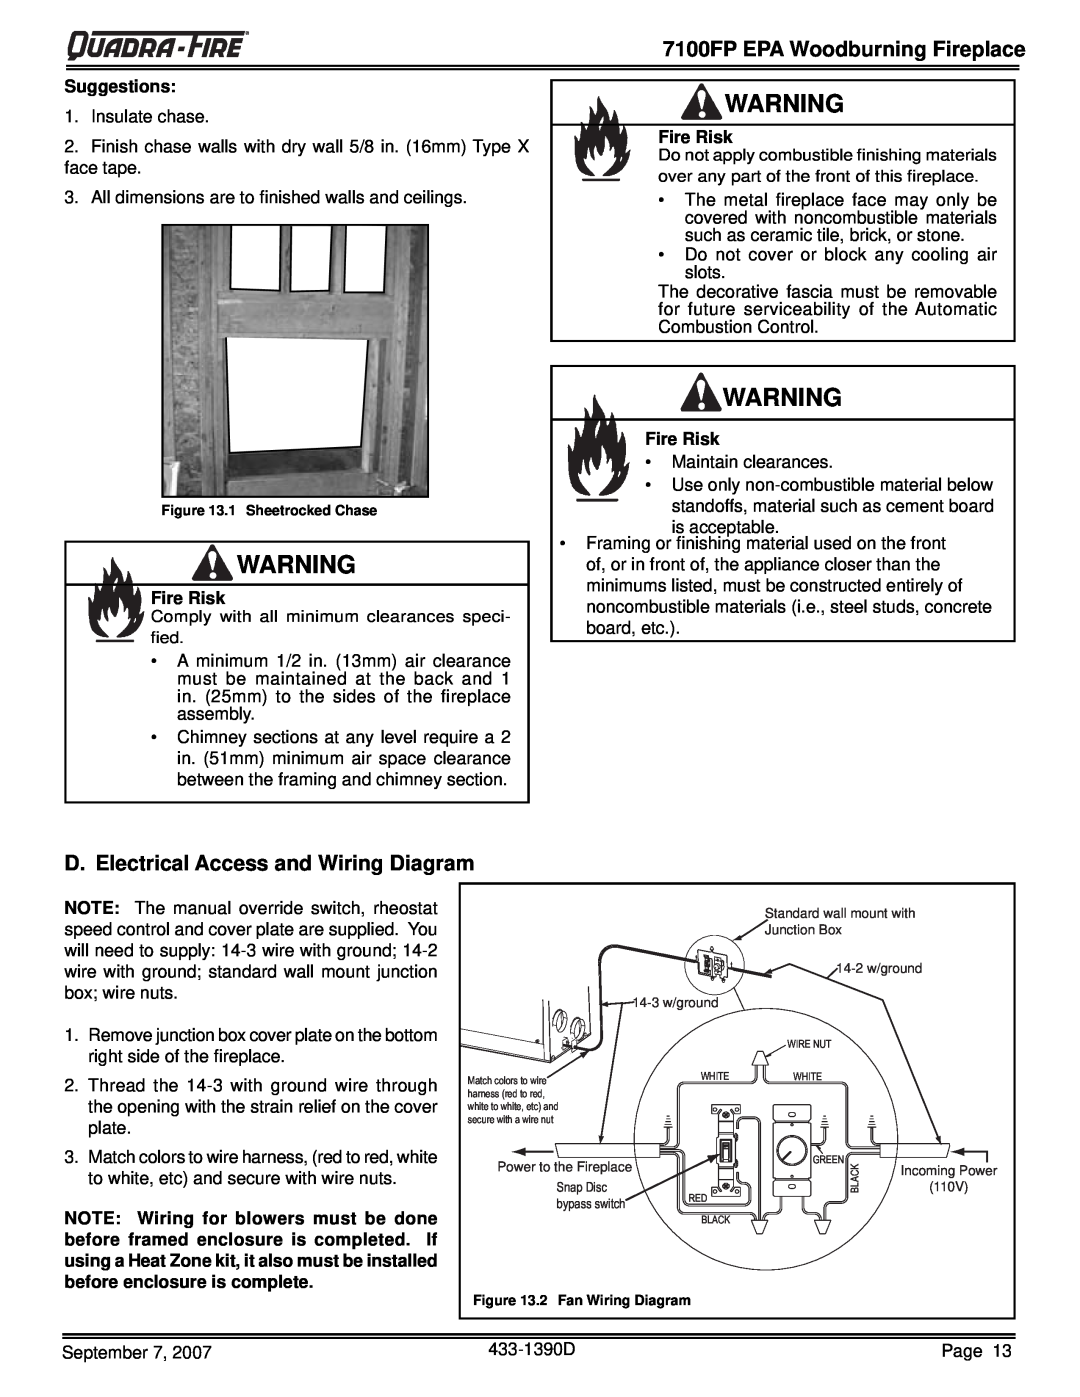 Quadra-Fire 7100FP-BK-B 7100FP EPA Woodburning Fireplace, D. Electrical Access and Wiring Diagram, Suggestions, Fire Risk 